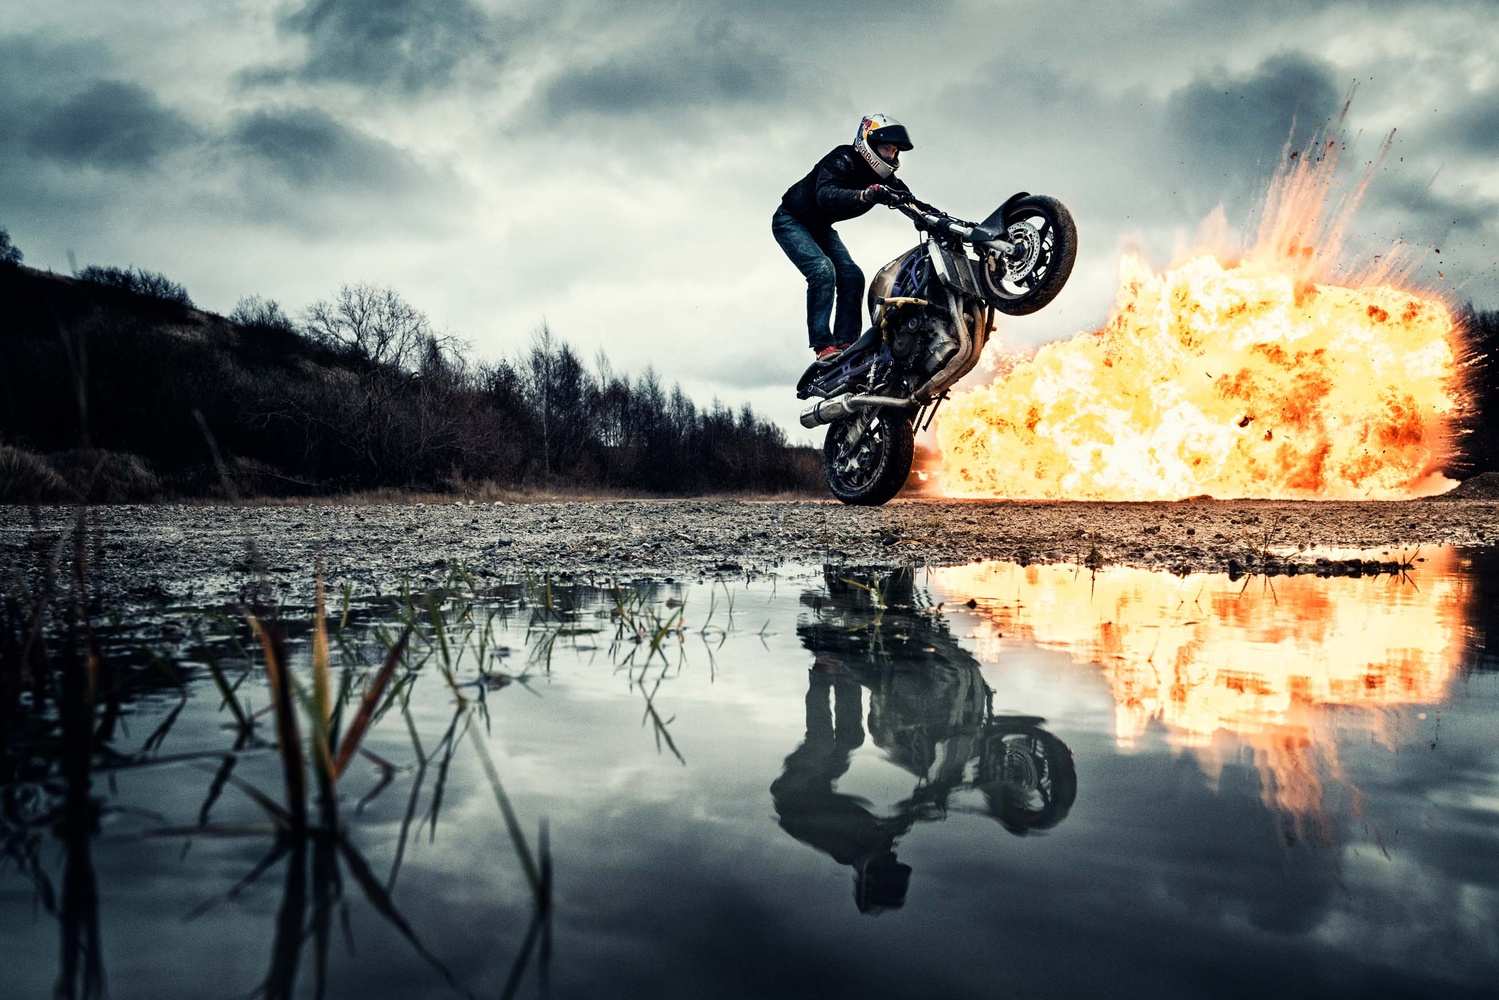 STUNTMEN ARE REAL ''SUPER HEROES''.